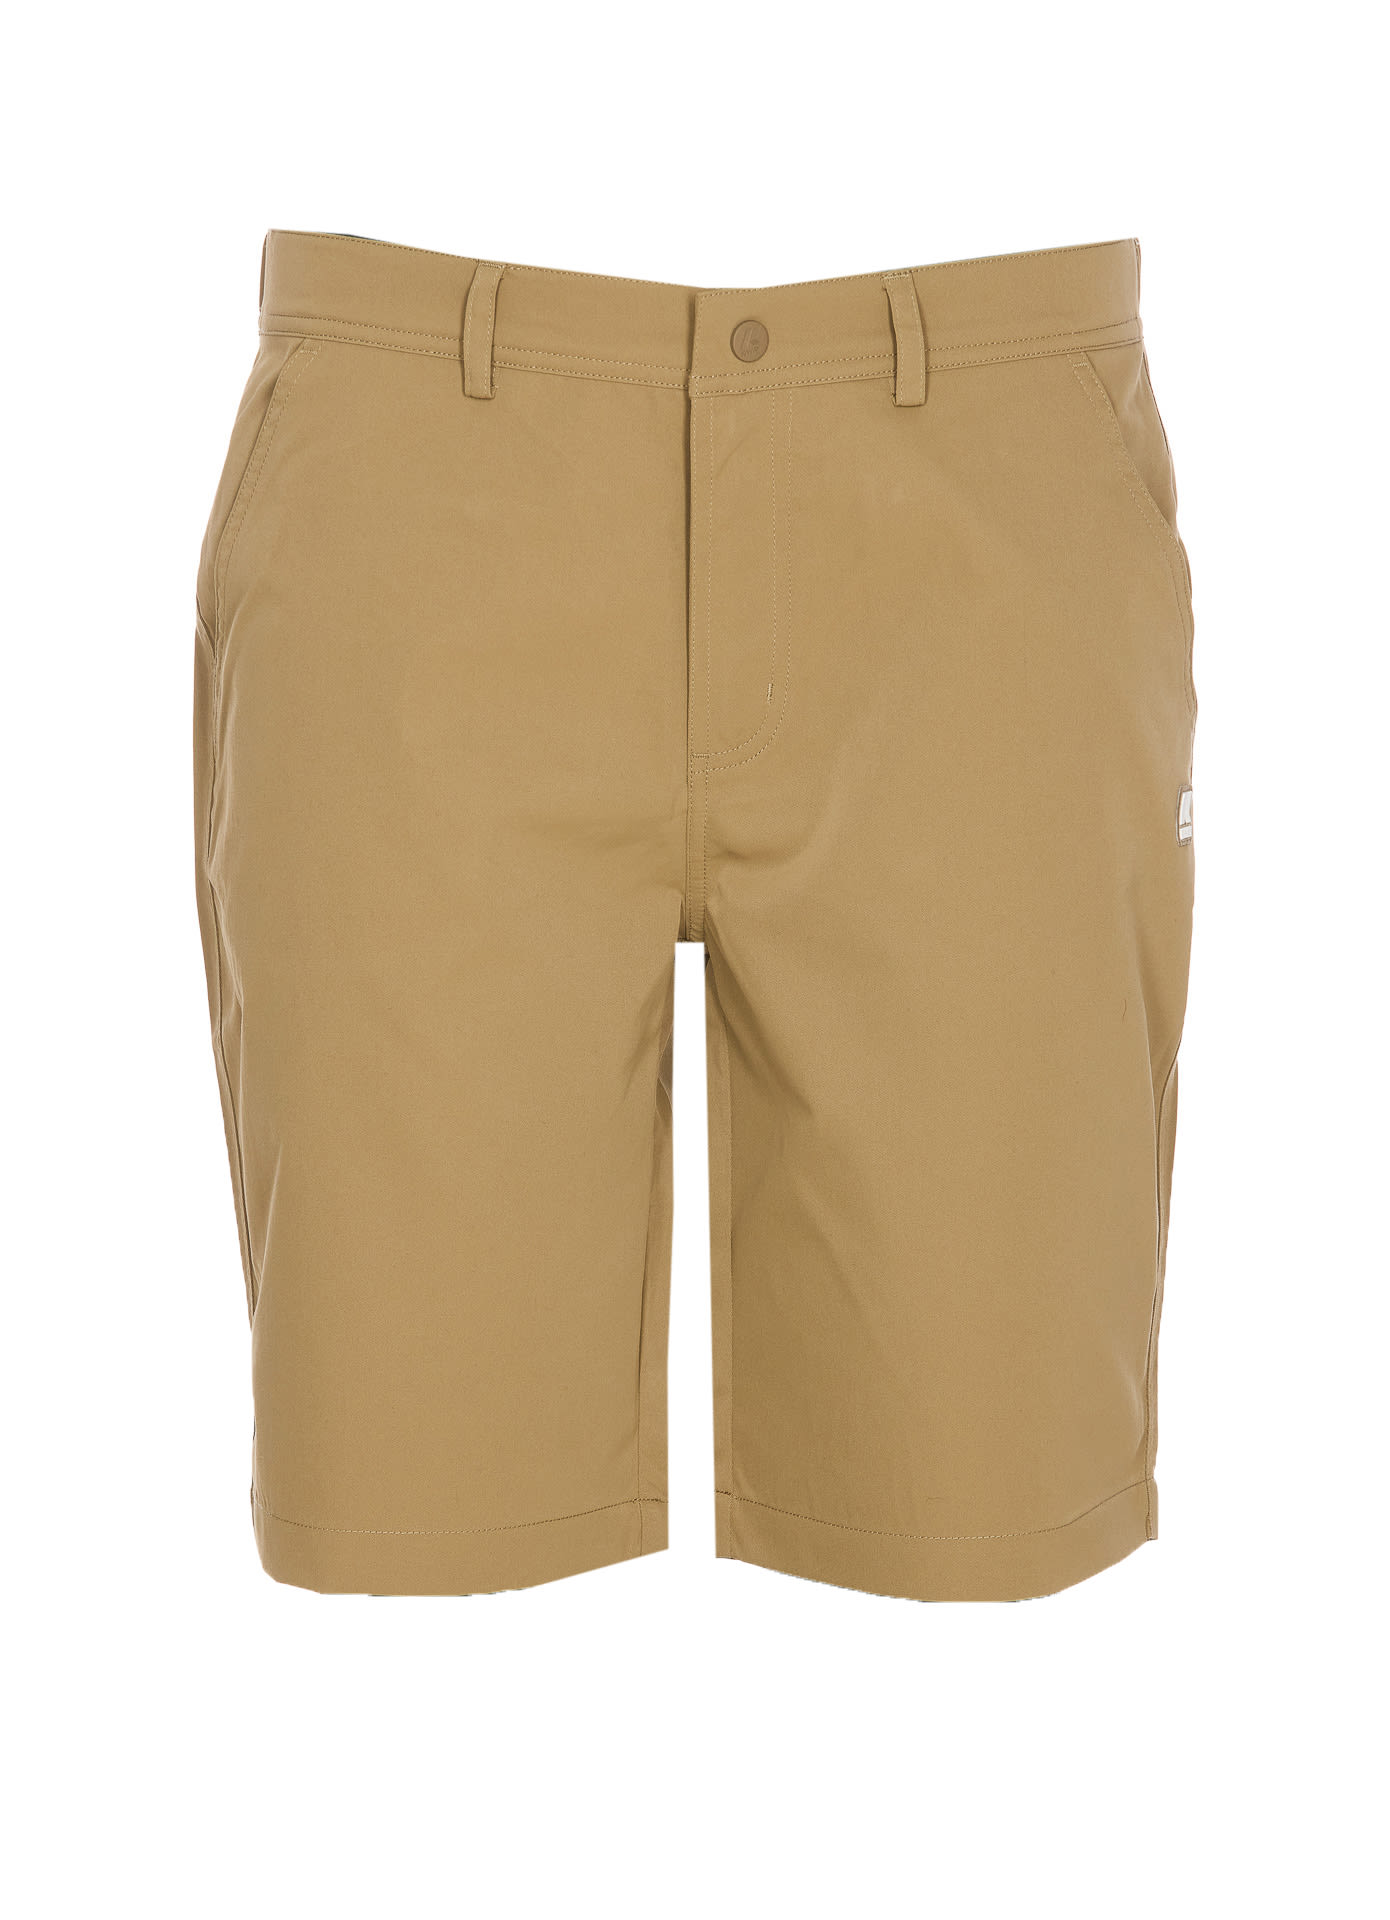 K-way Pave Twill Shorts In Beige